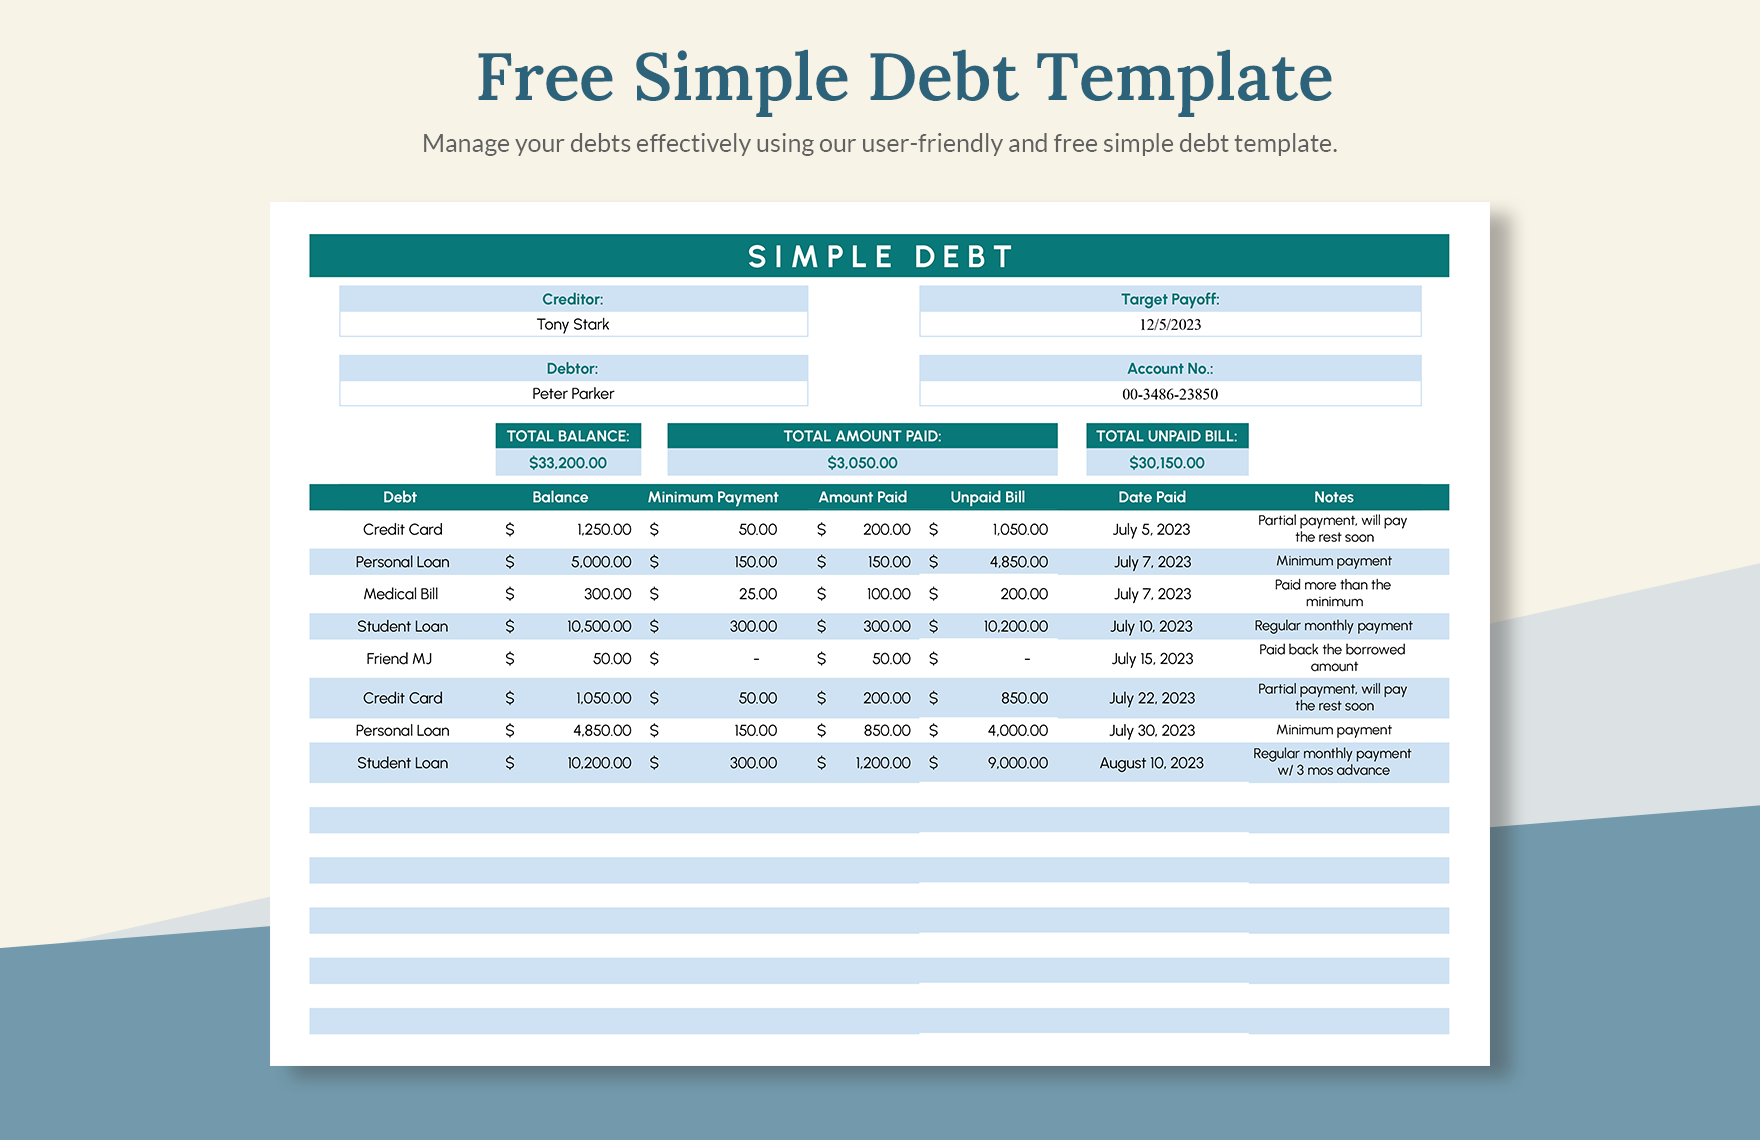 Free Simple Debt Template in Excel, Google Sheets